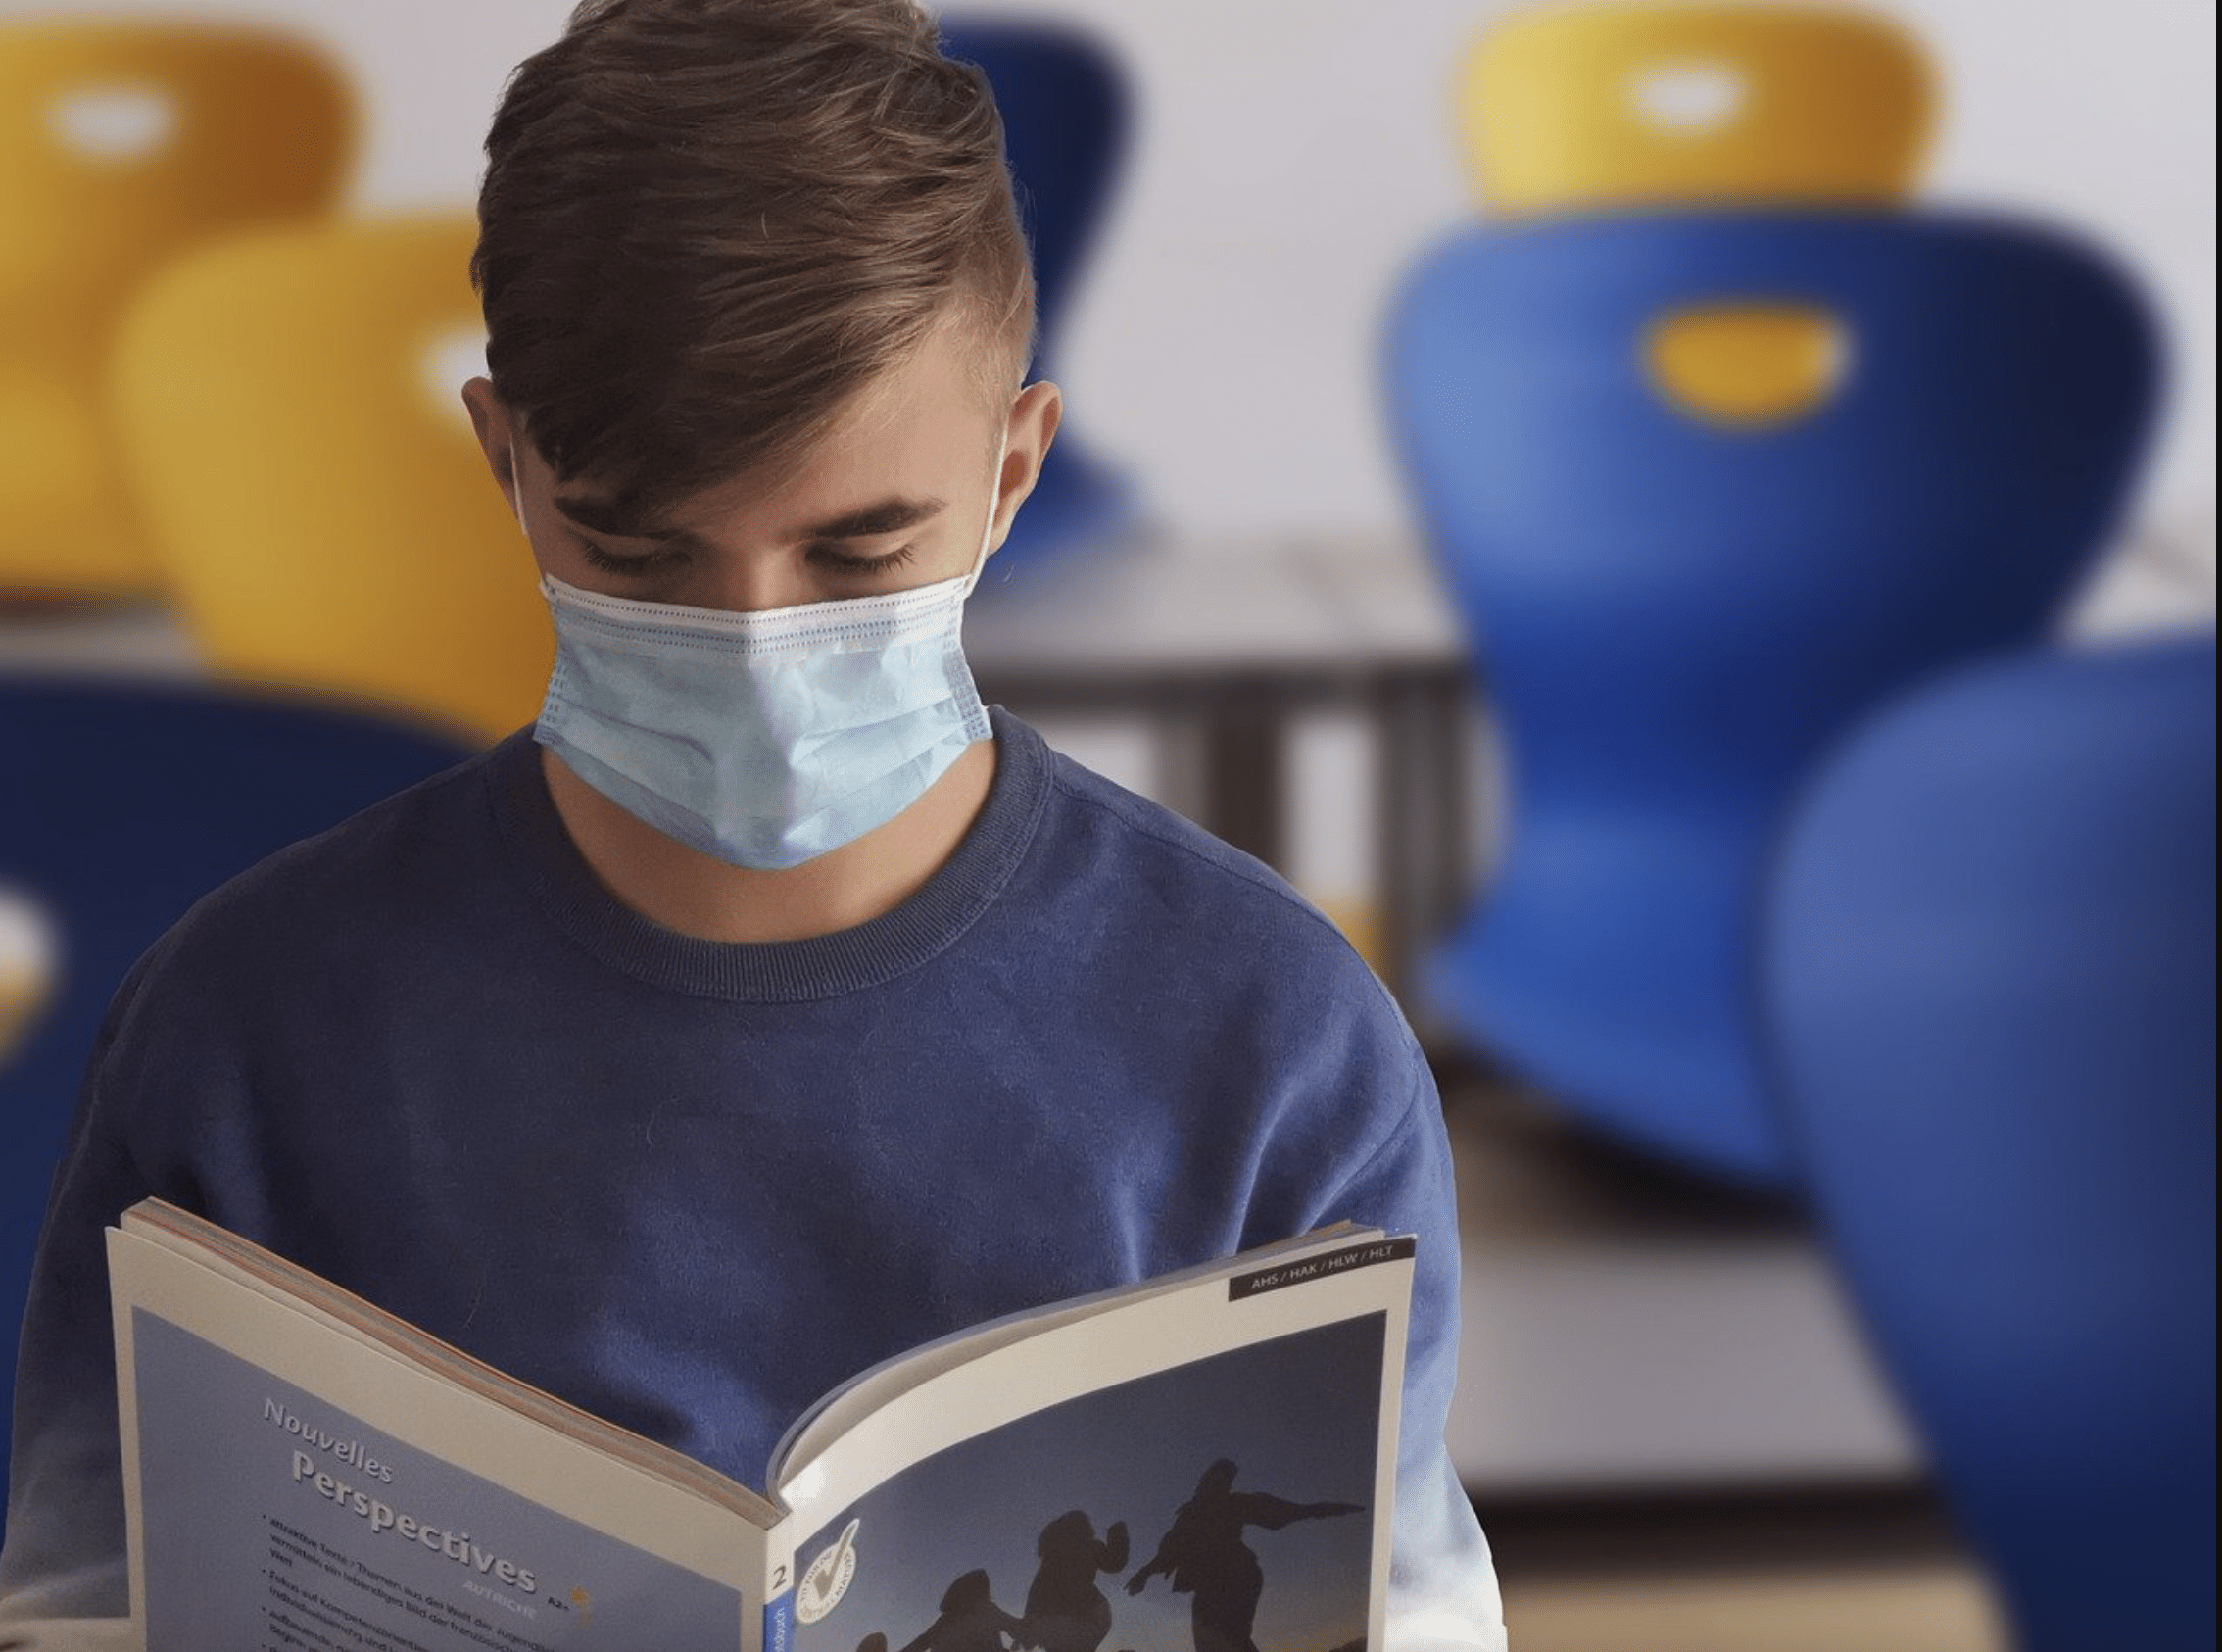 Student reads a book in school with mask on 